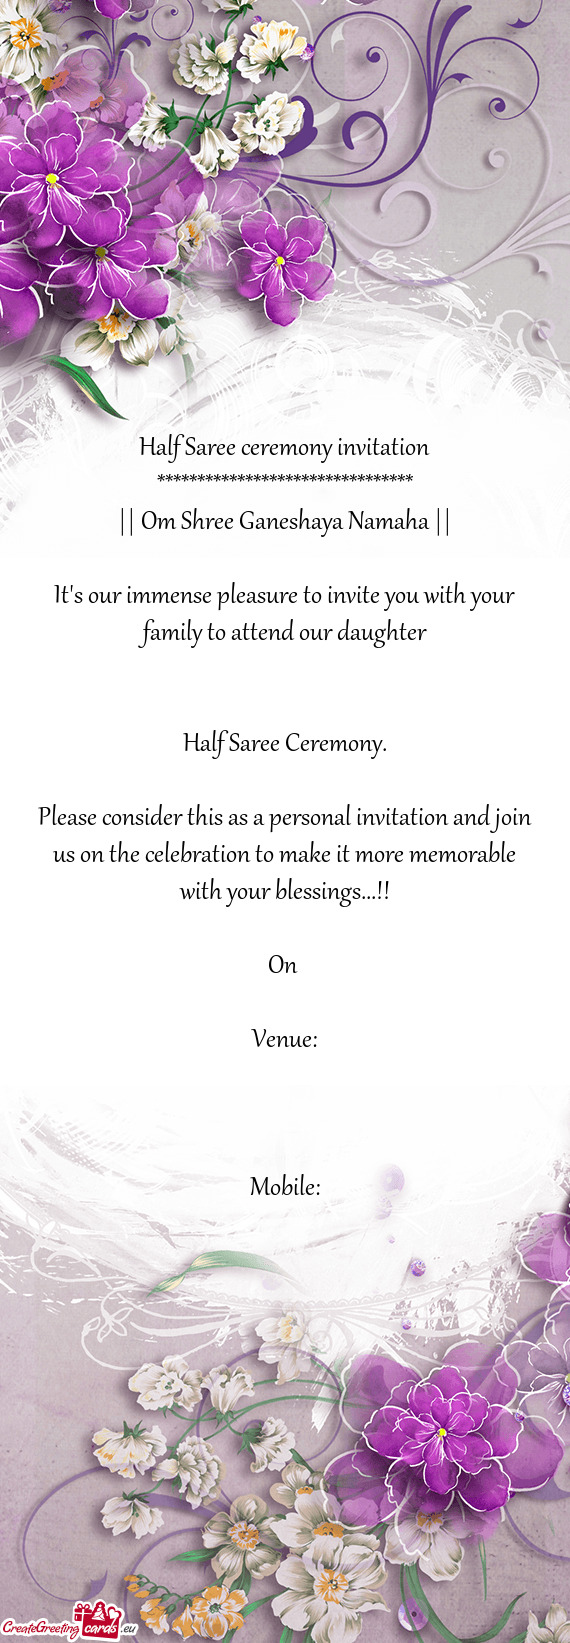 It's our immense pleasure to invite you with your family to attend our daughter  Half Saree C